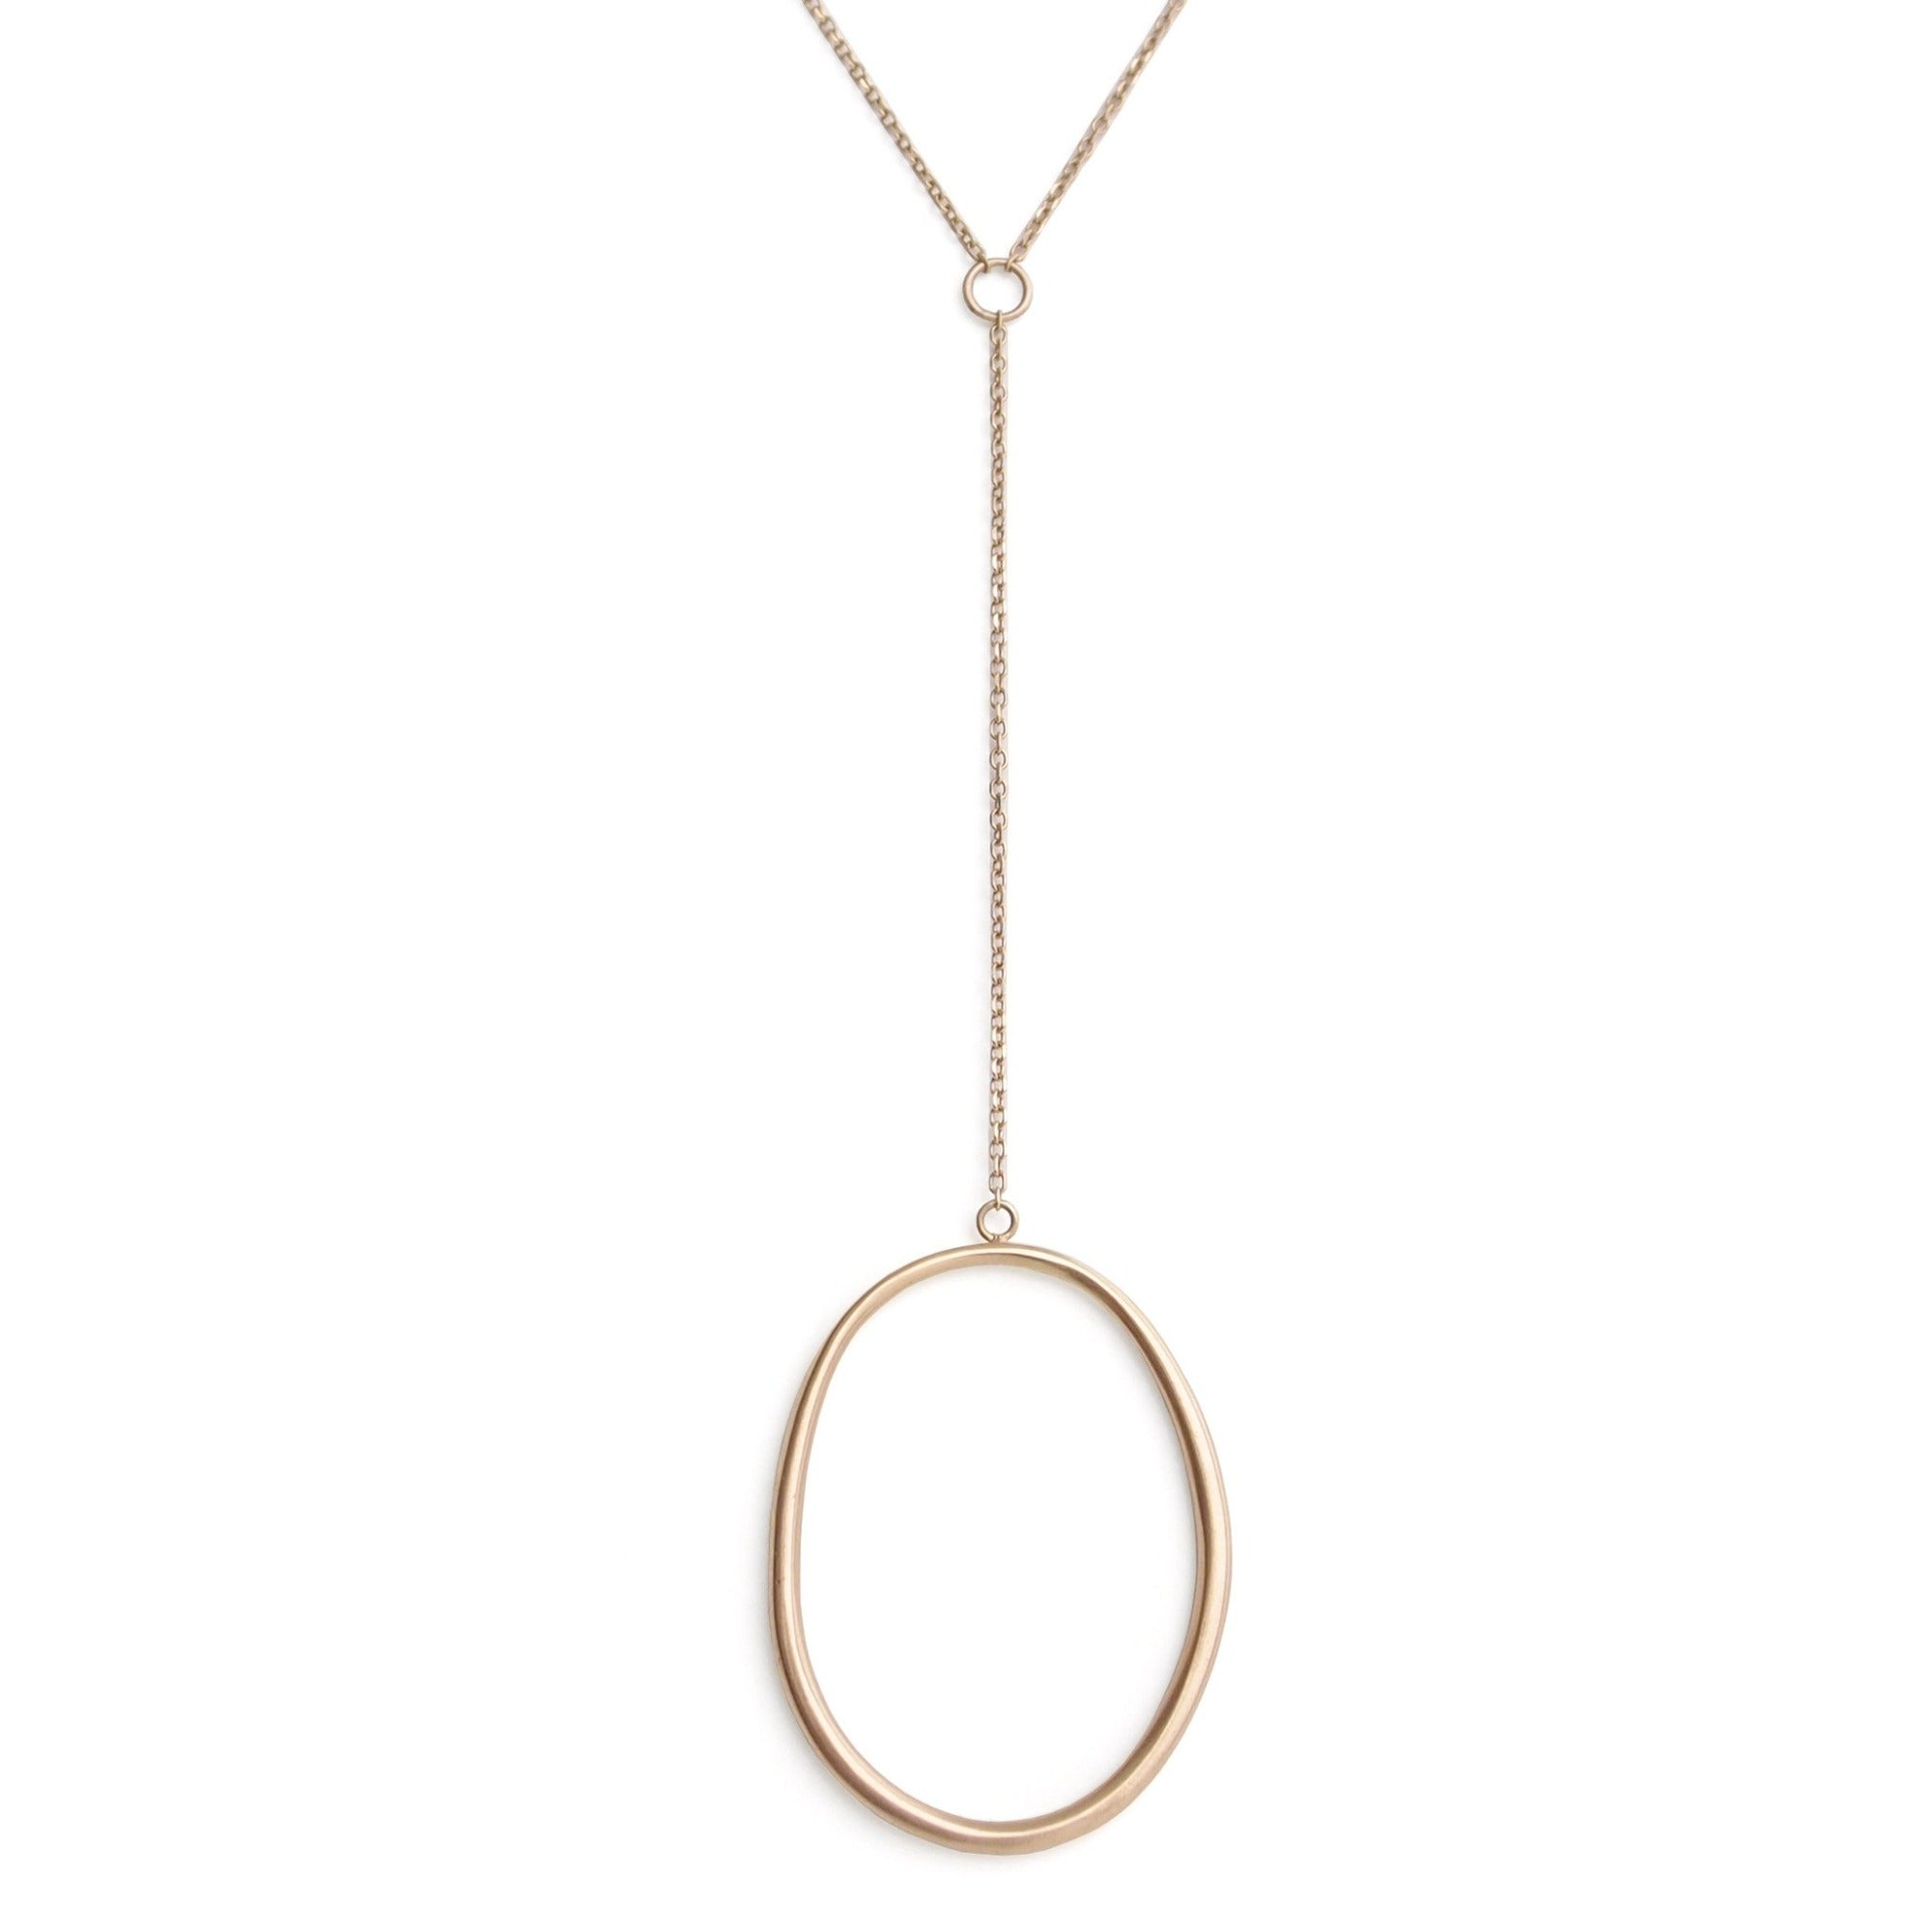 14k yellow gold drawn "o" drop necklace